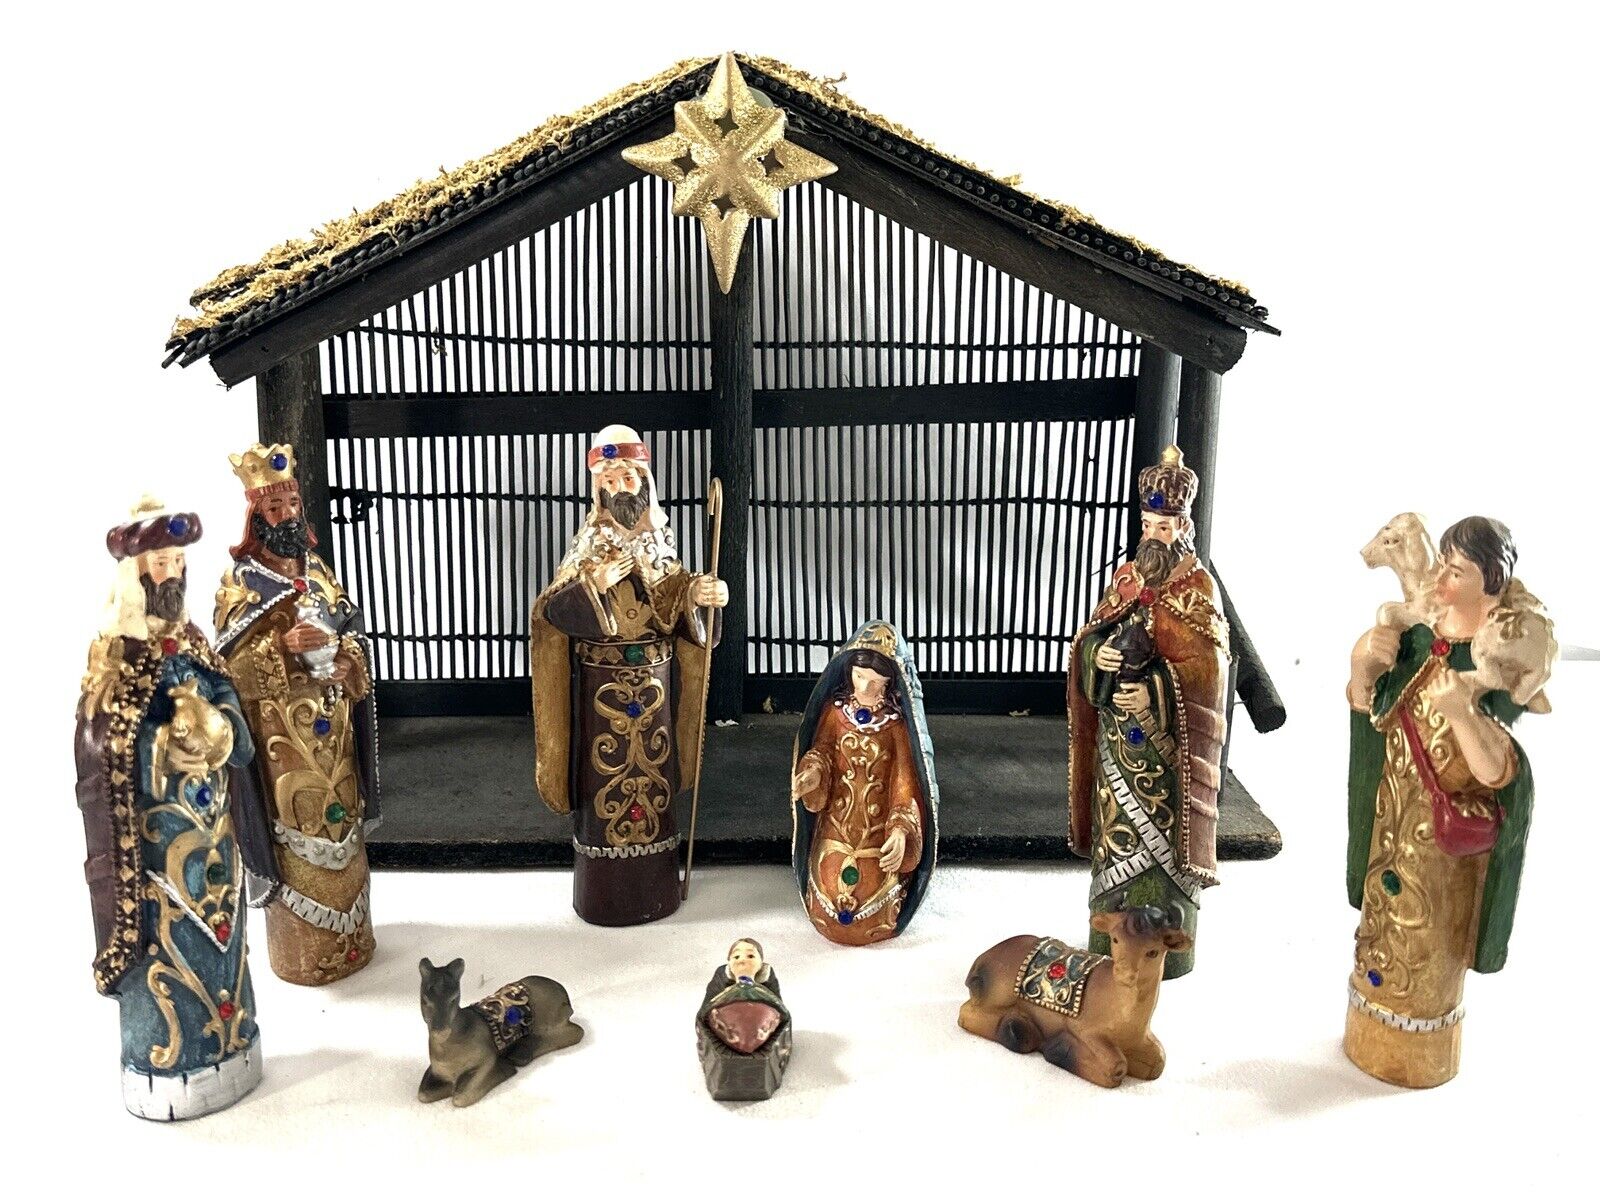 Vintage Rare 10 Piece Hand Painted Jeweled Resin Nativity Set With Wood Stable